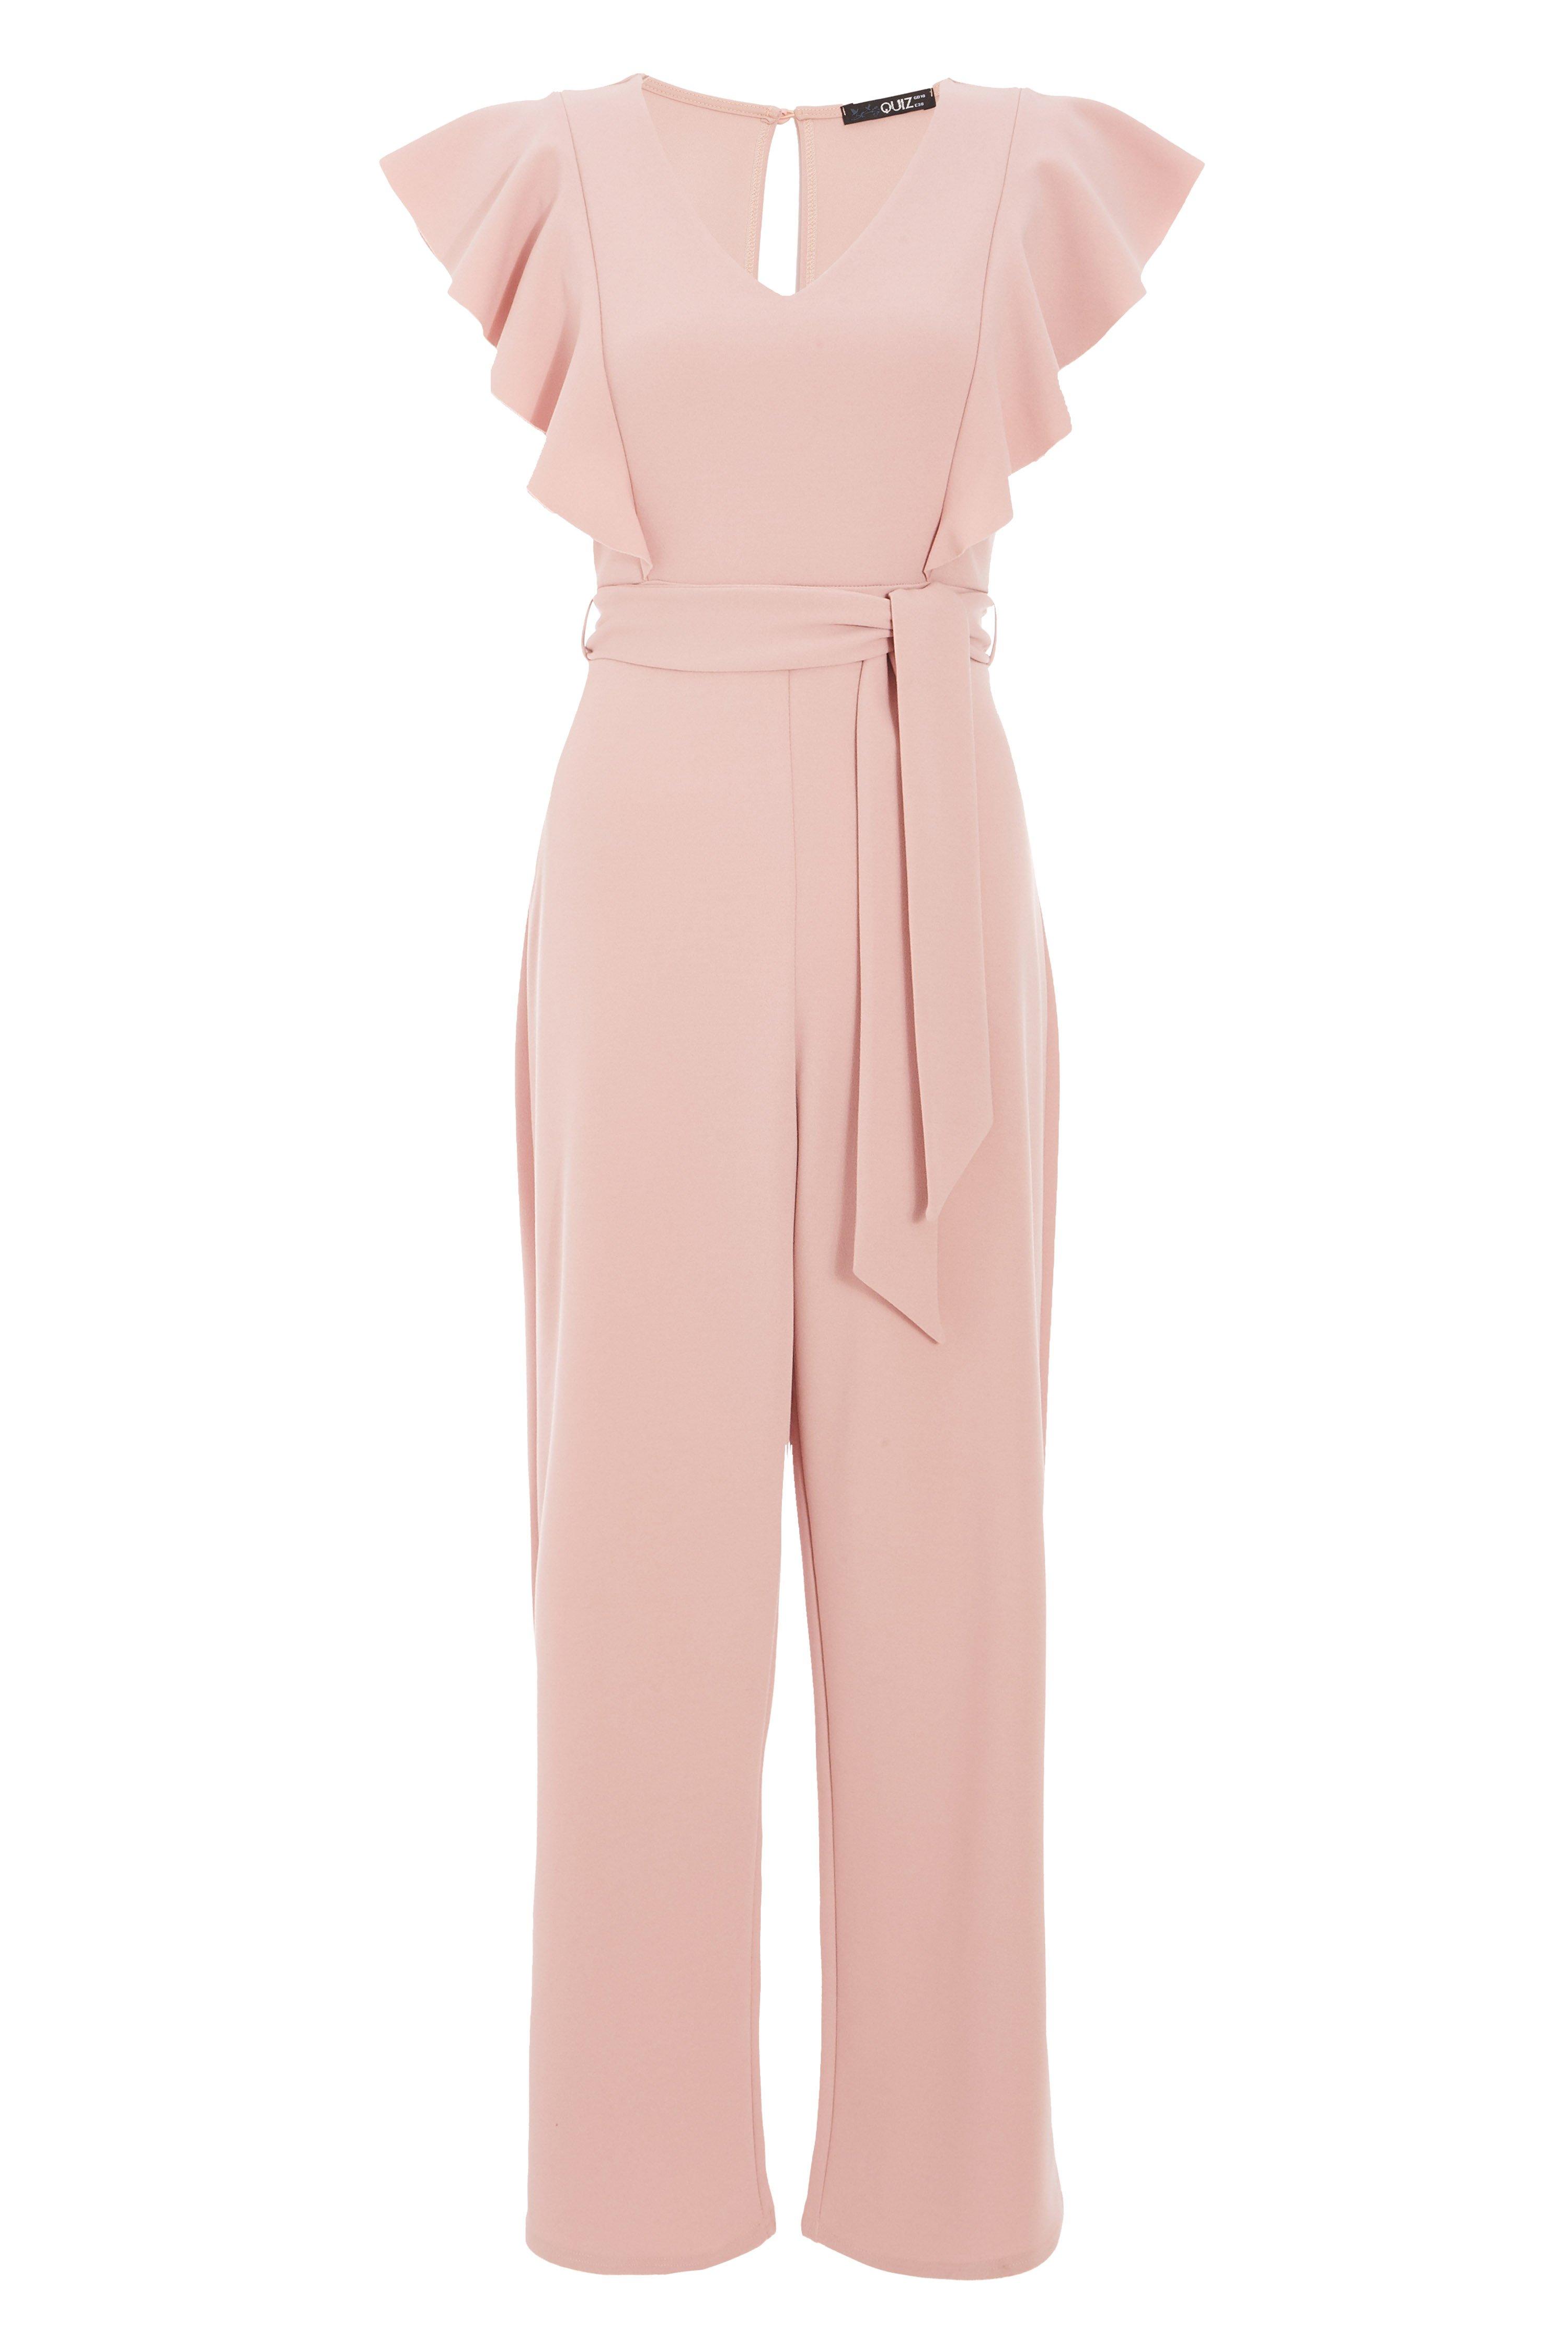 Pink Frill Palazzo Jumpsuit - Quiz Clothing